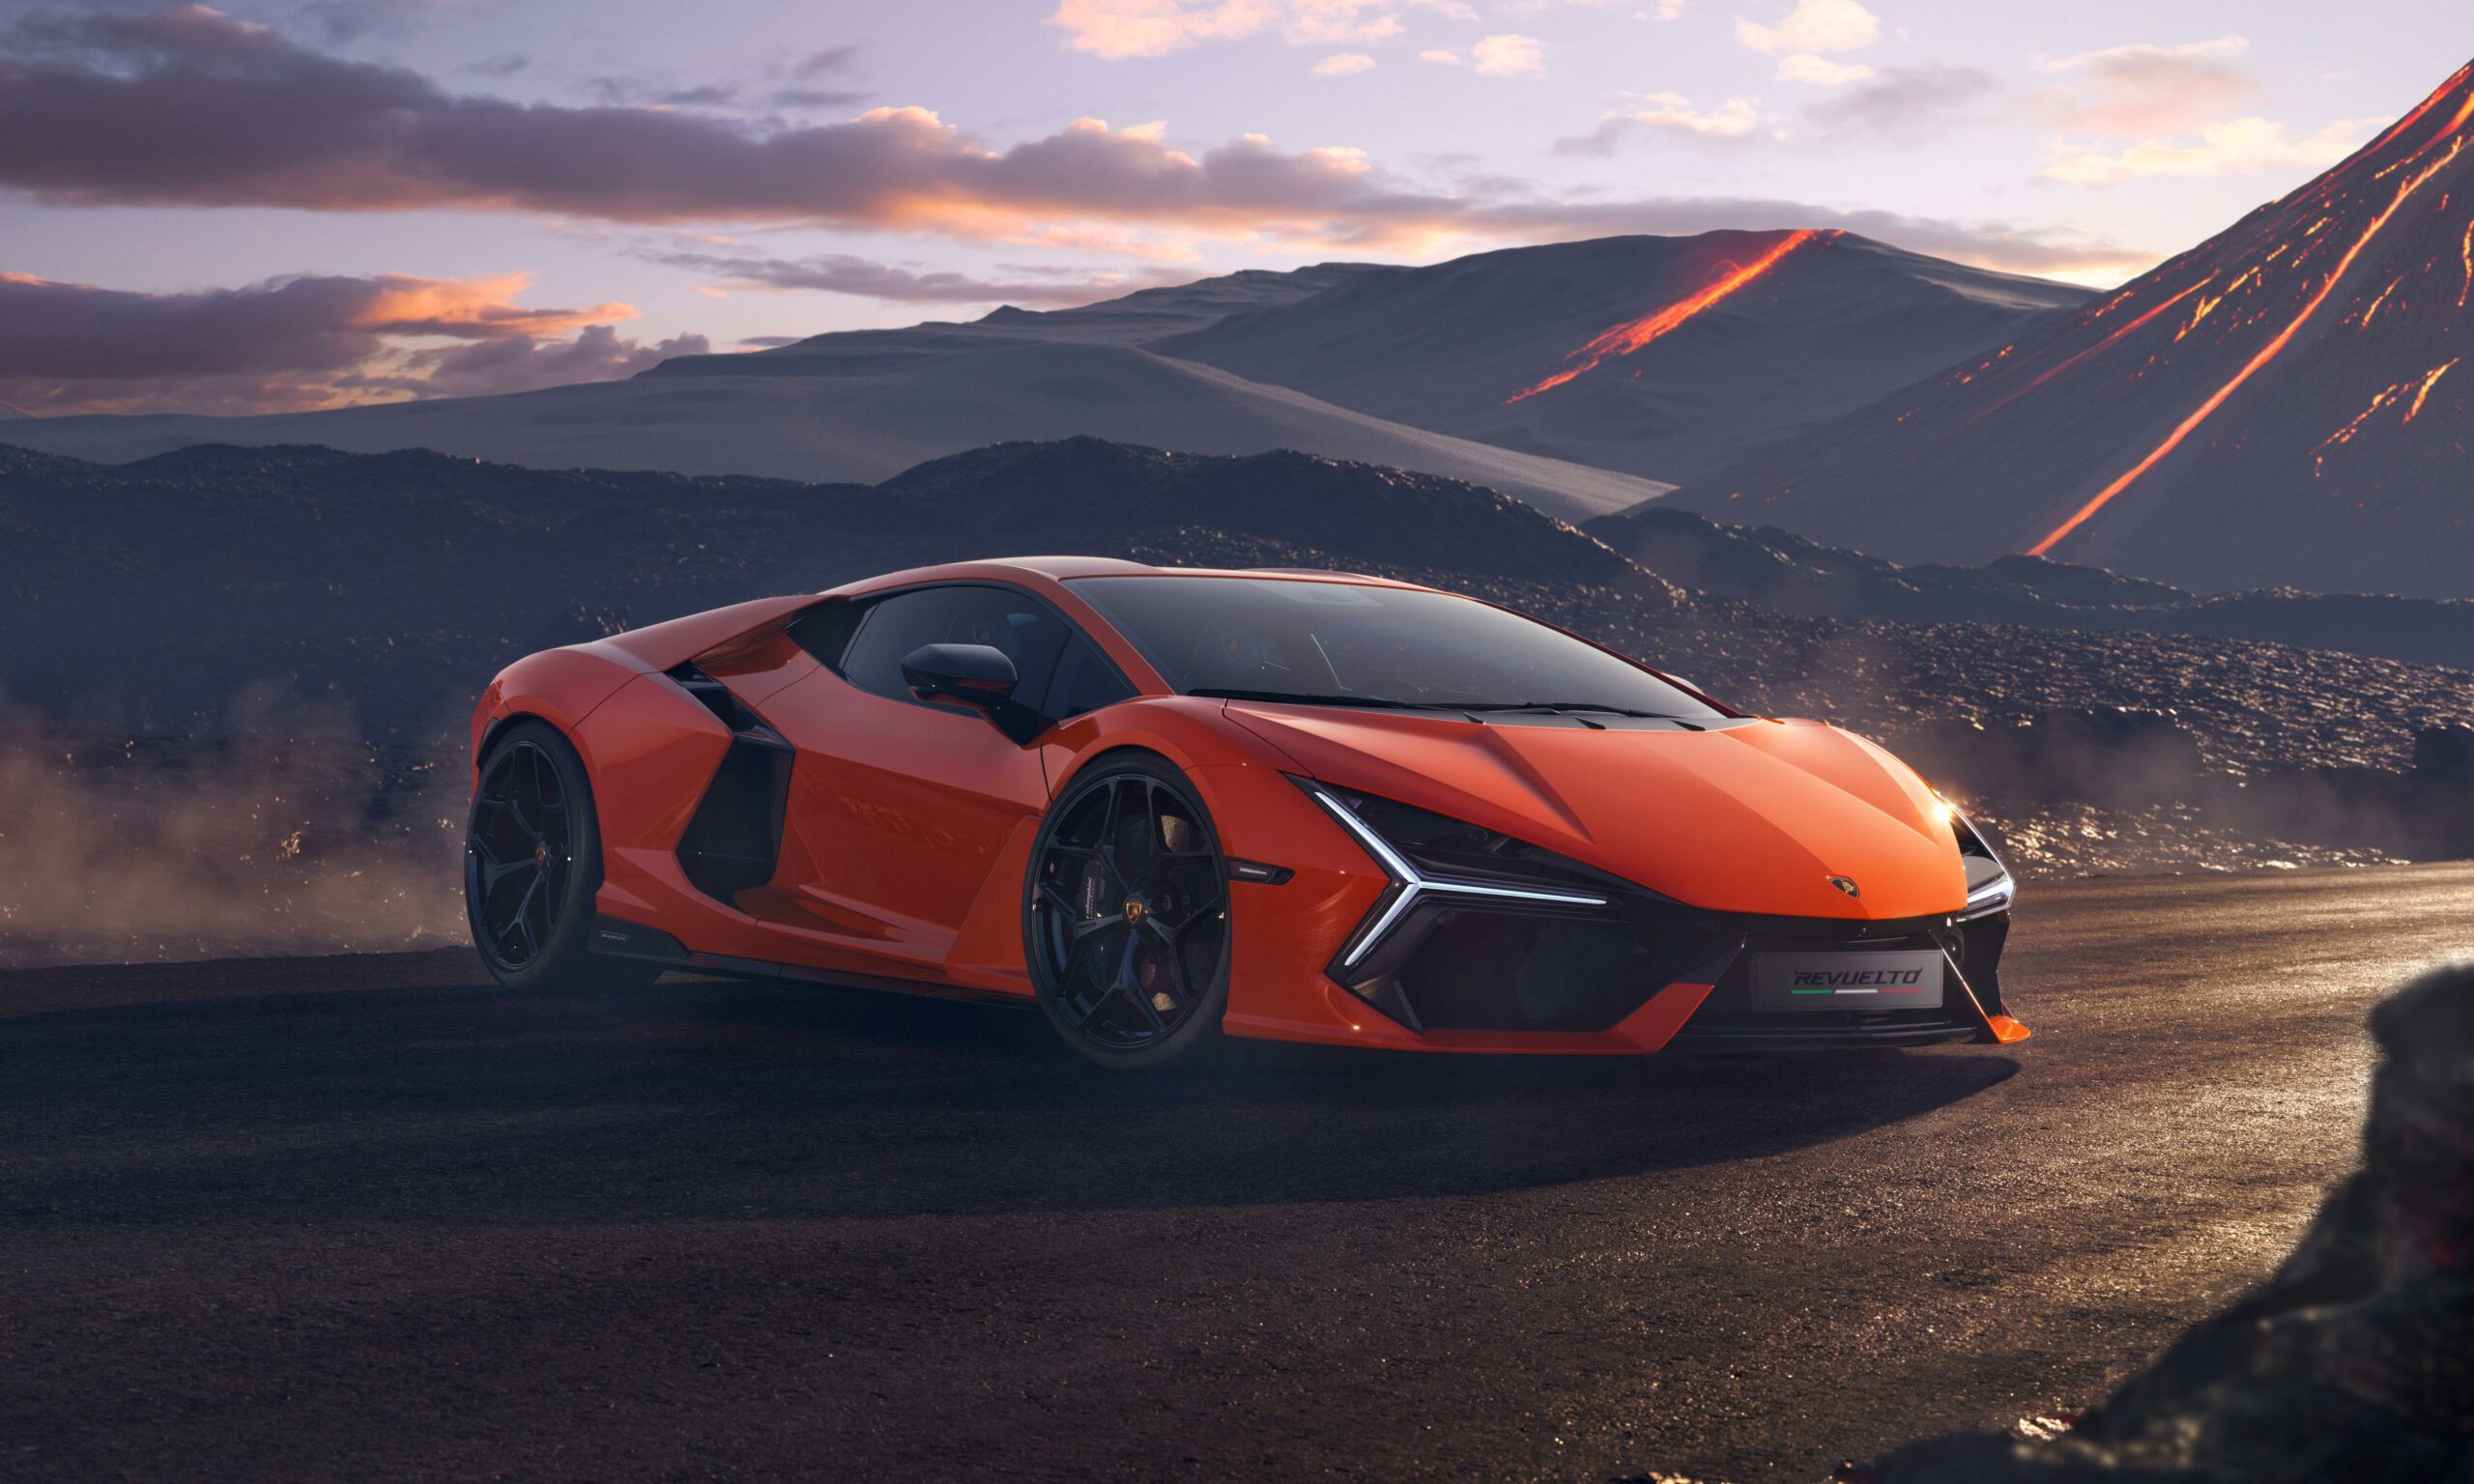 Selling dreams': Lamborghini CEO on perfecting the brand's 1st